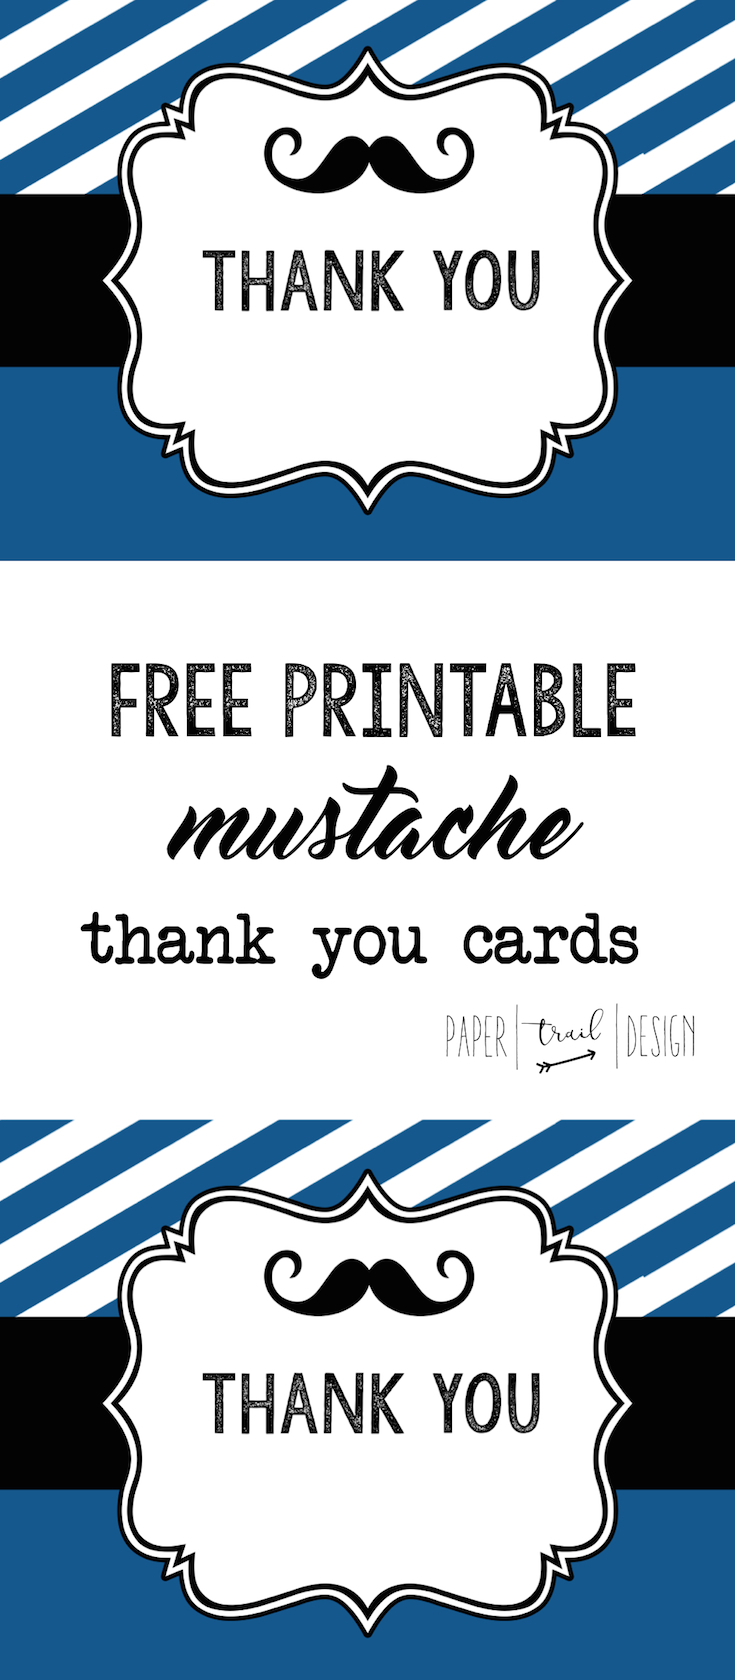 Mustache Thank You Cards Free Printable: Print these cards after your mustache birthday party or baby shower and make adorable thank you notes. These would also make a great gift at a baby shower. 